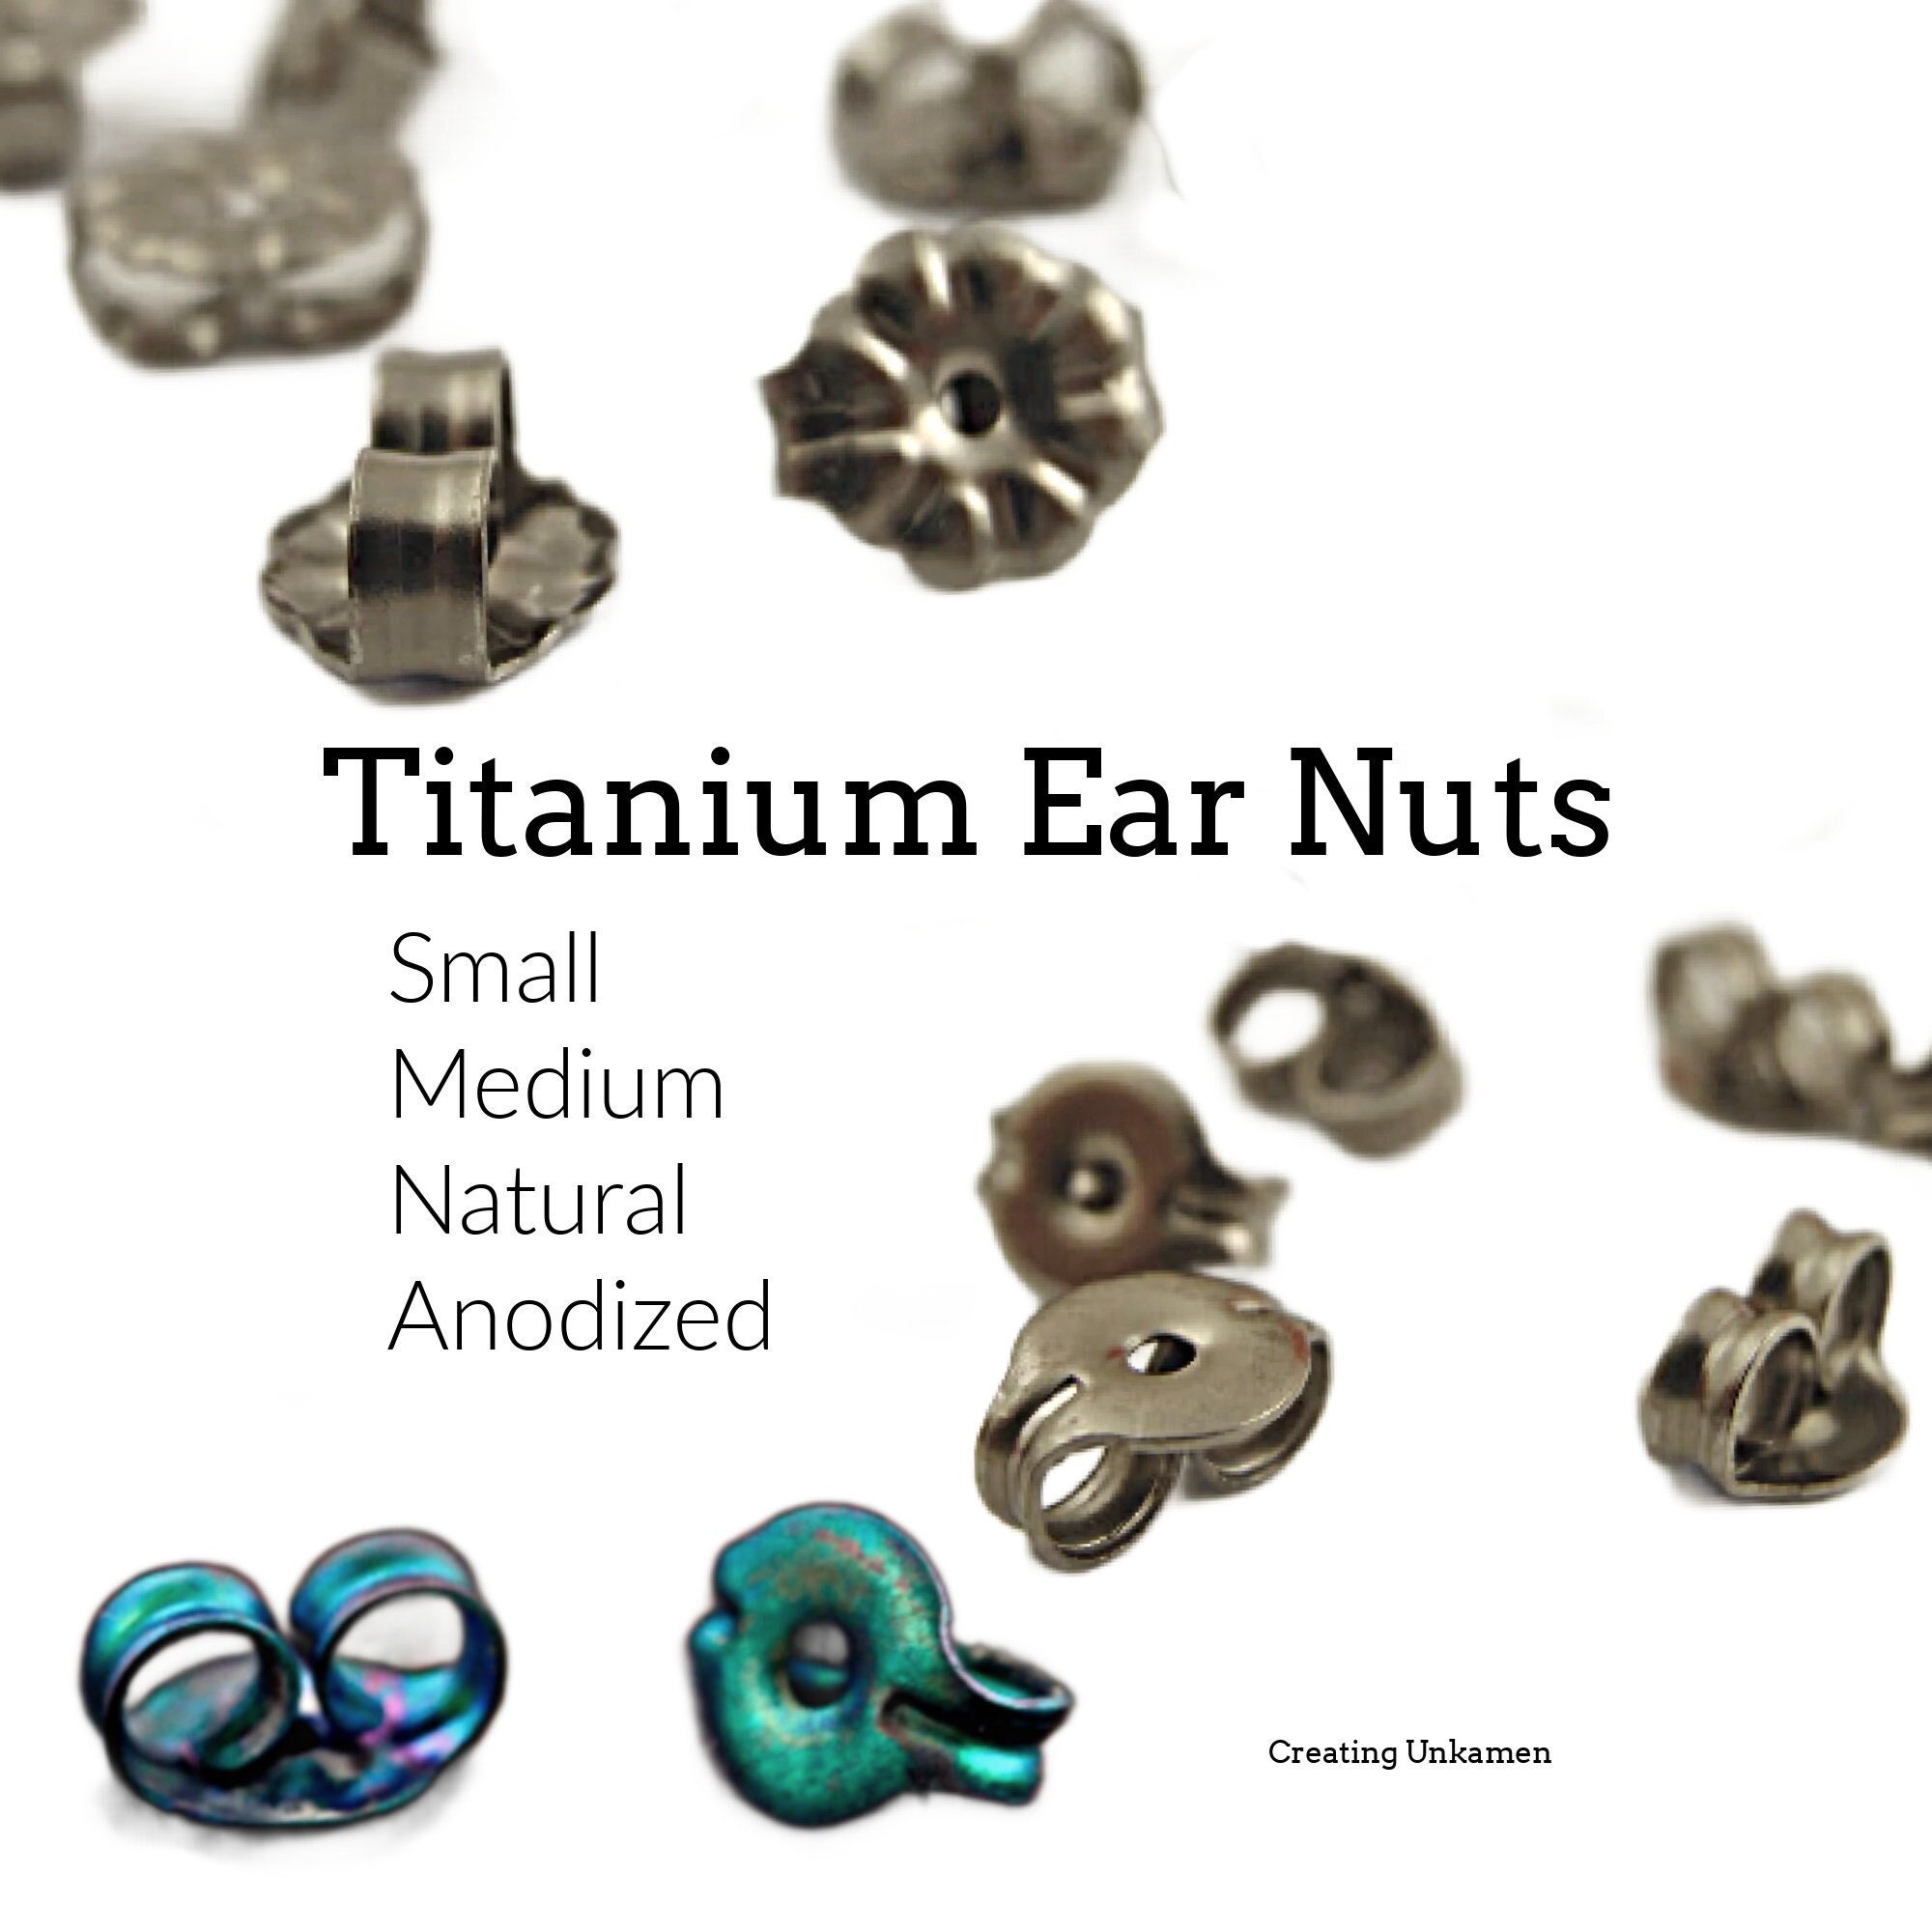 Titanium Earring Backs Nickel-free, Hypoallergenic Ear Nuts for Standard  Post Earrings, Lightweight, Small but Sturdy Made in USA 